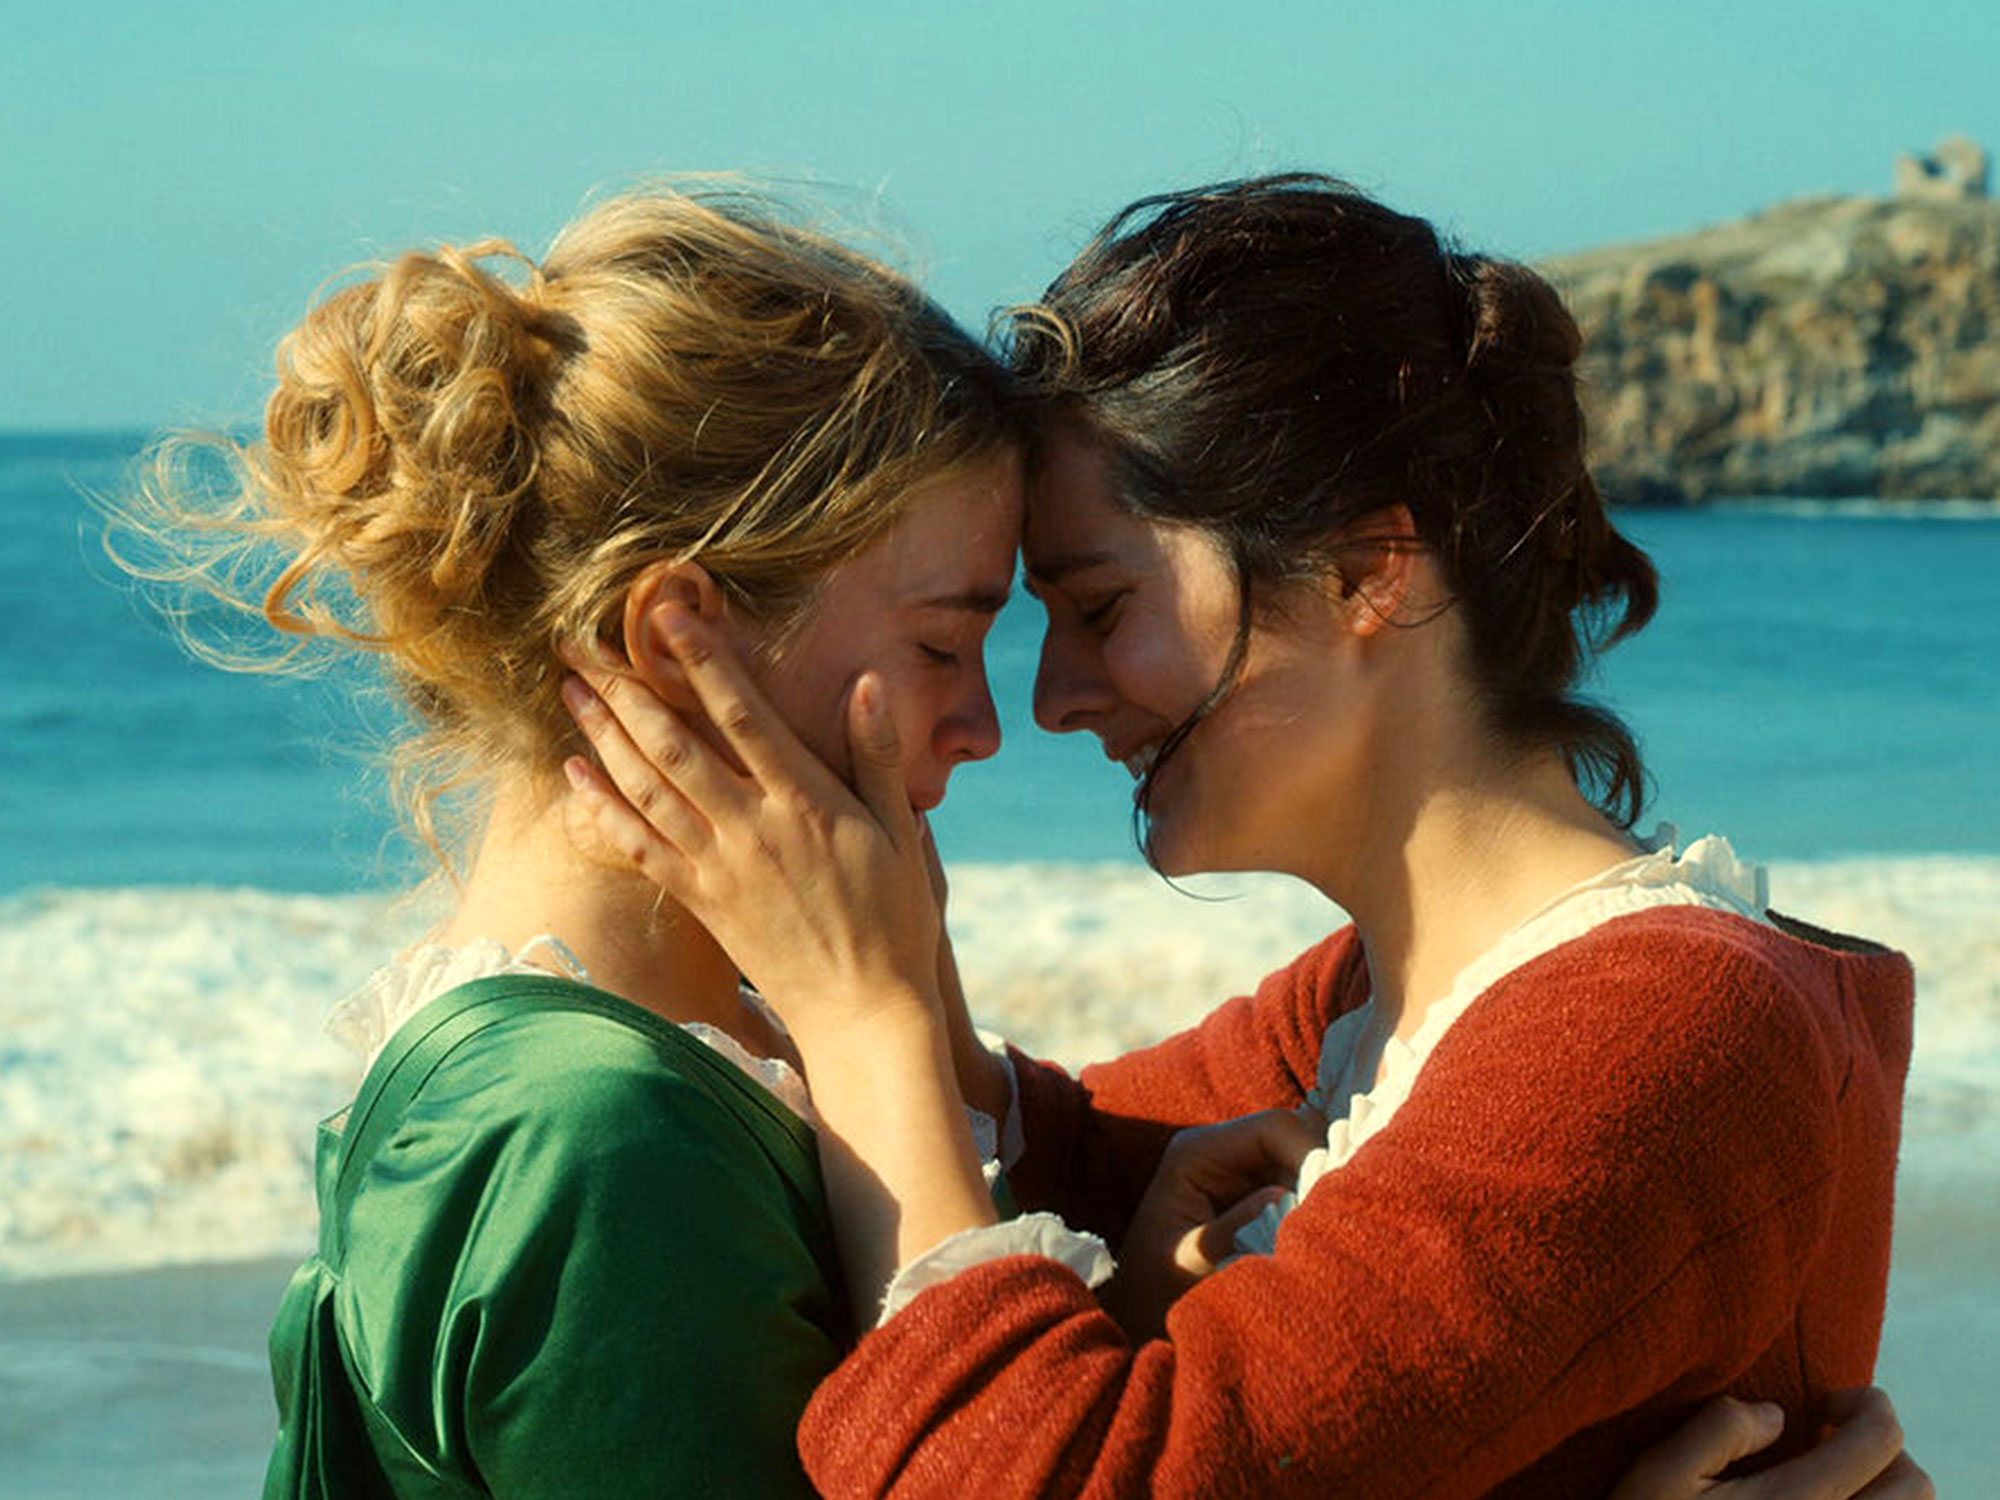 Adèle Haenel and Noémie Merlant in Portrait of a Lady on Fire (2019)